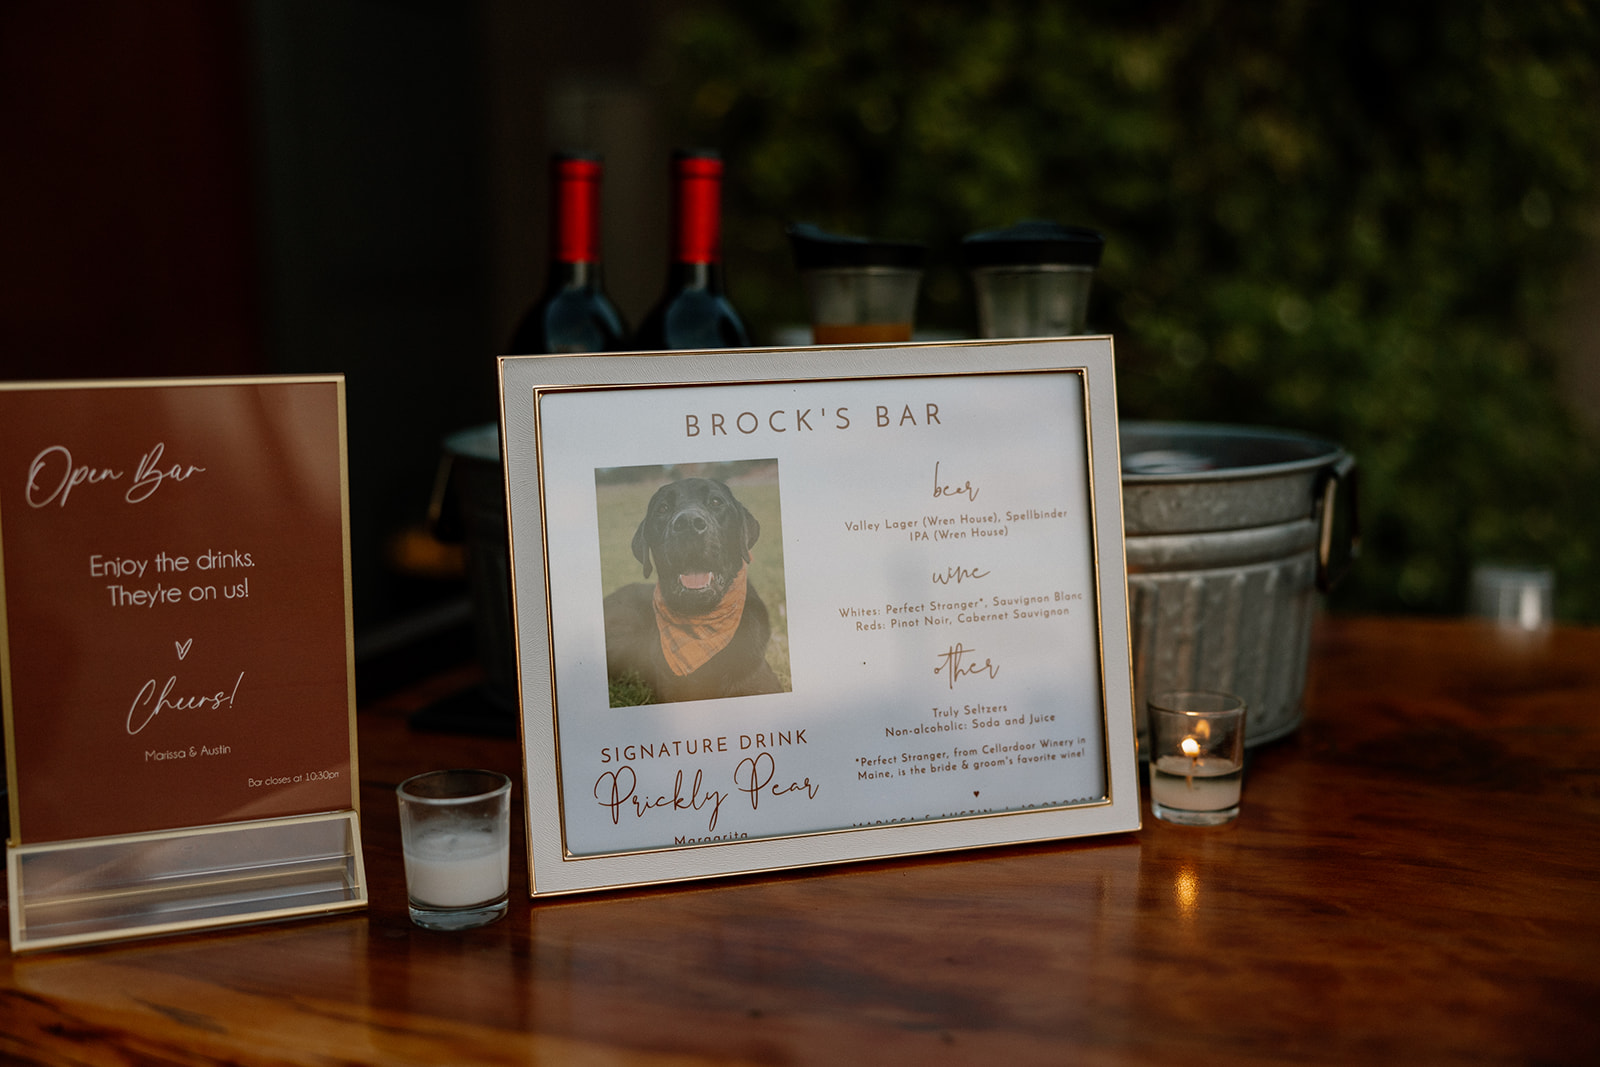 Detail photo of their bar arrangement featuring Brock the black lab! 